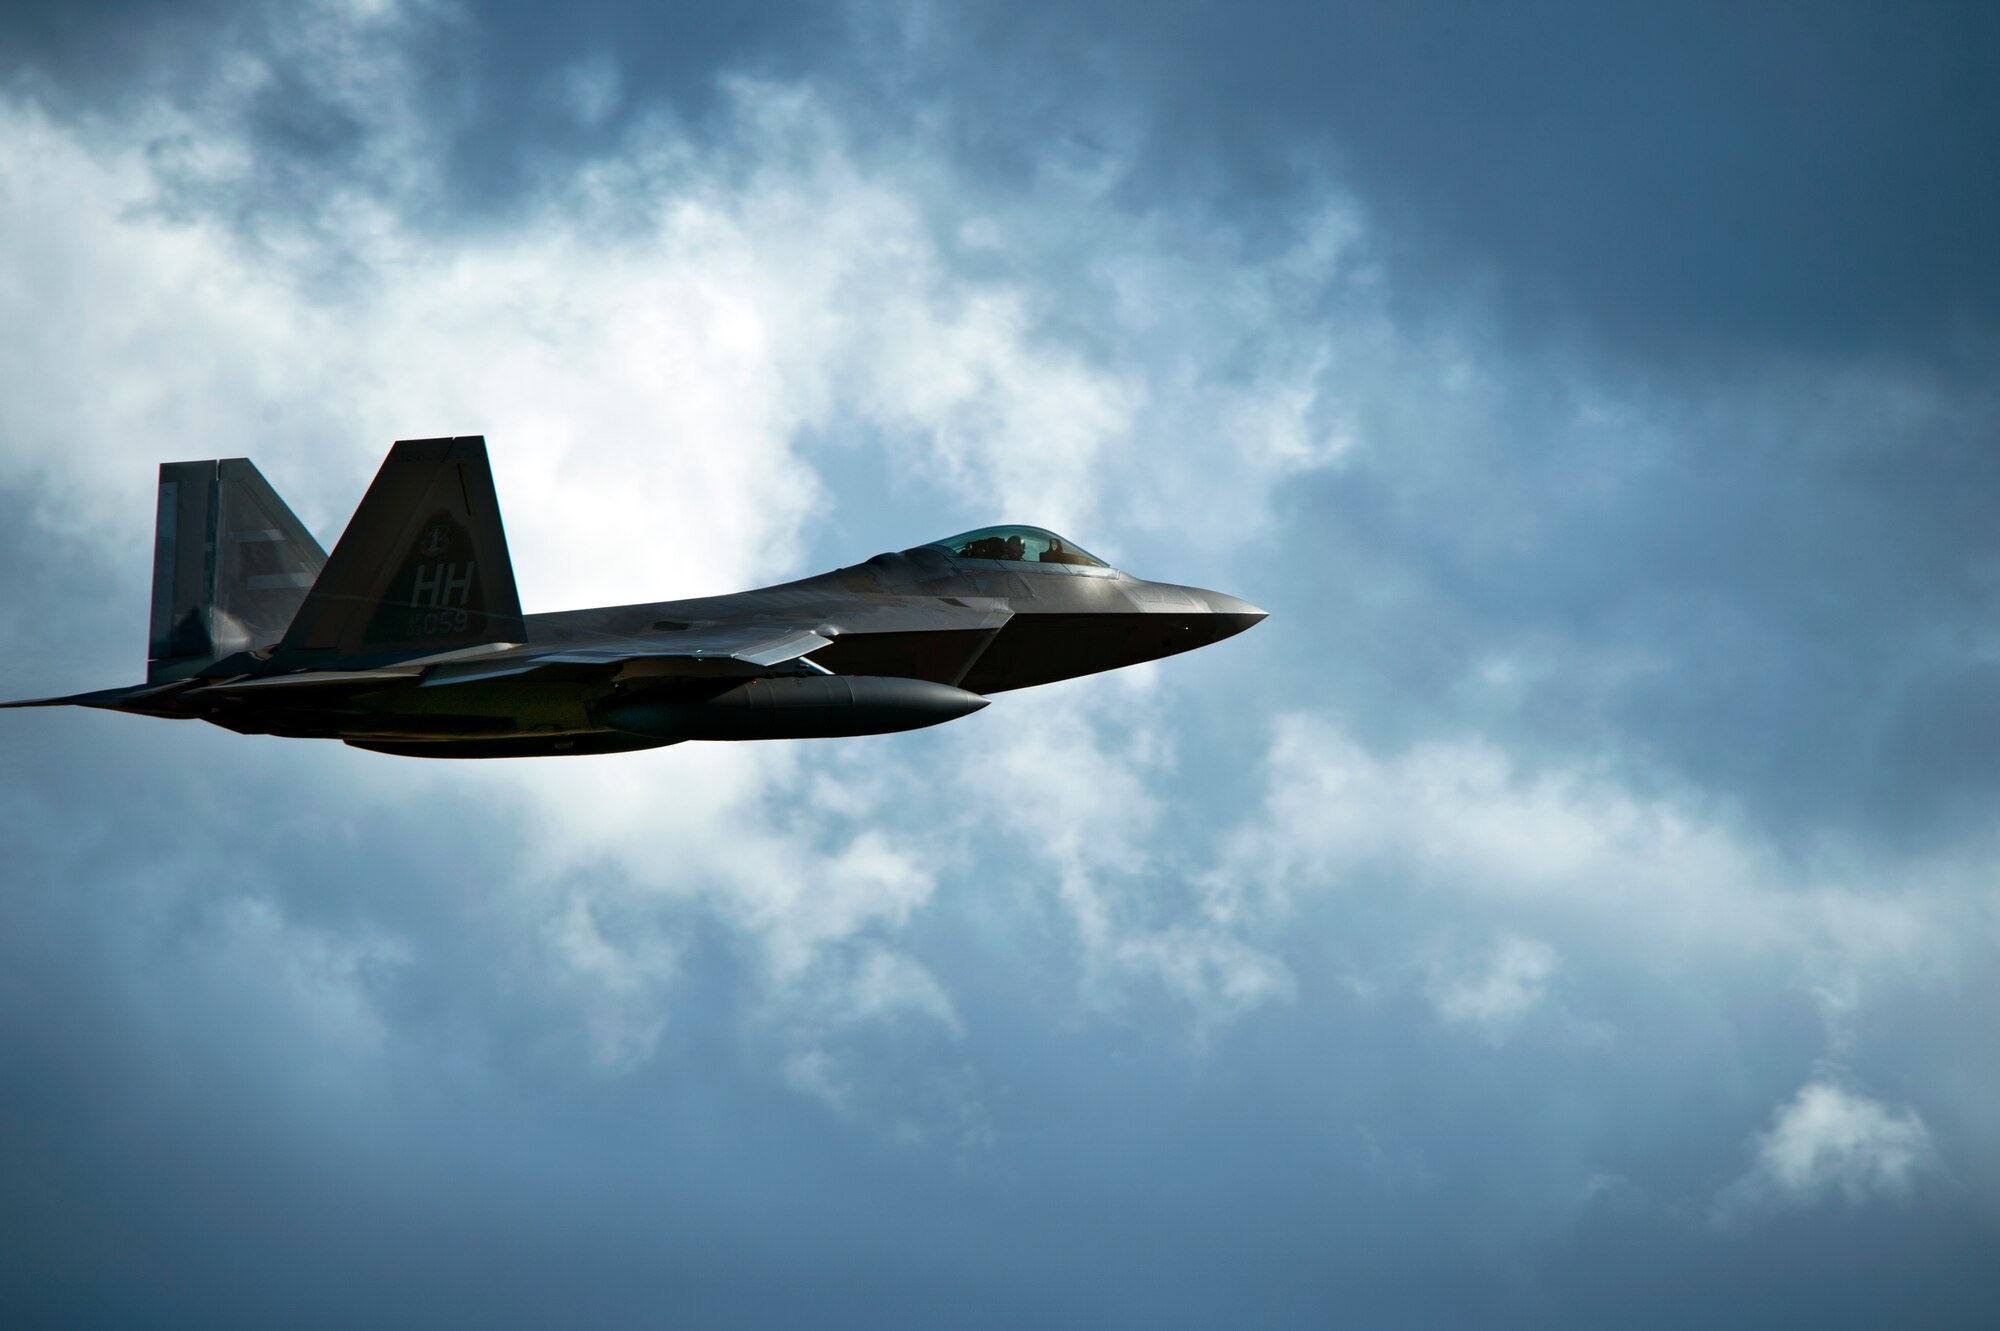 A United States Air Force F-22 Raptor, from the Hawaiian Raptors, increases altitude shortly after taking off from Joint Base Pearl Harbor-Hickam, Hawaii, April 20, 2015. The F-22's characteristics provide a synergistic effect ensuring F-22A lethality against all advanced air threats. The combination of stealth, integrated avionics and supercruise drastically shrinks surface-to-air missile engagement envelopes and minimizes enemy capabilities to track and engage the F-22 . (U.S. Air Force photo by Tech. Sgt. Aaron Oelrich/Released)     